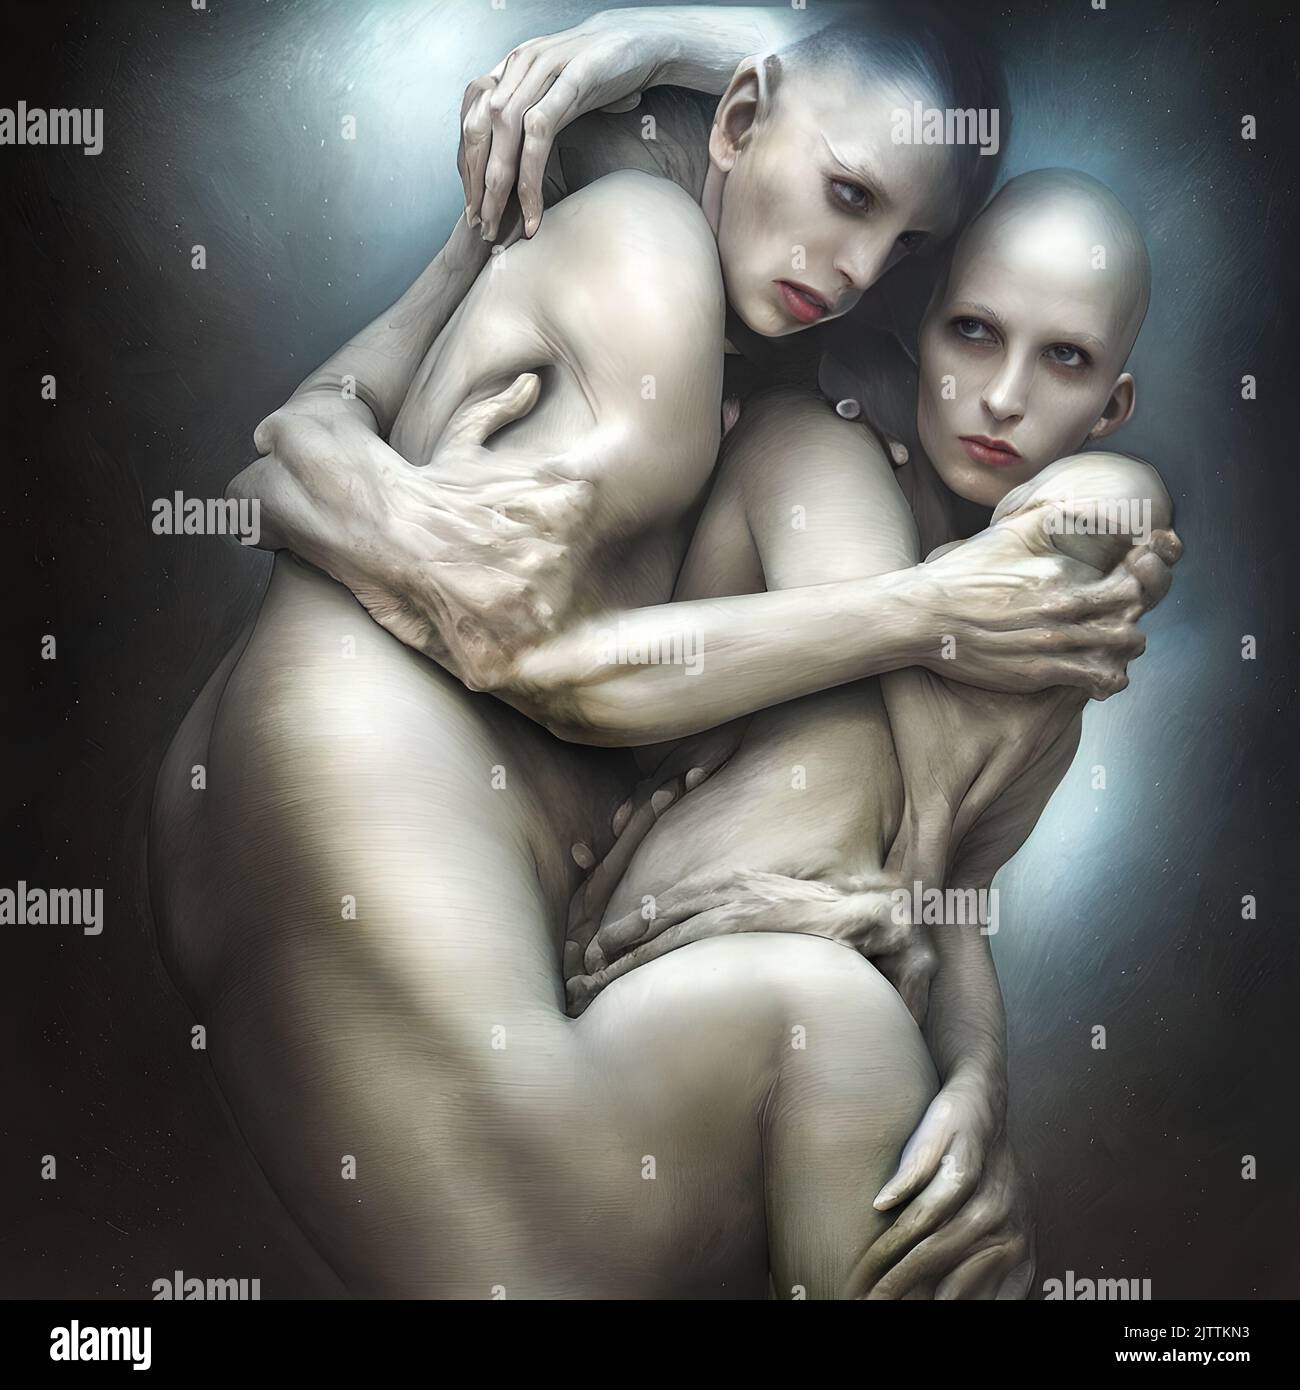 Surrealistic portrait of two white skinned humanoids embracing Stock Photo